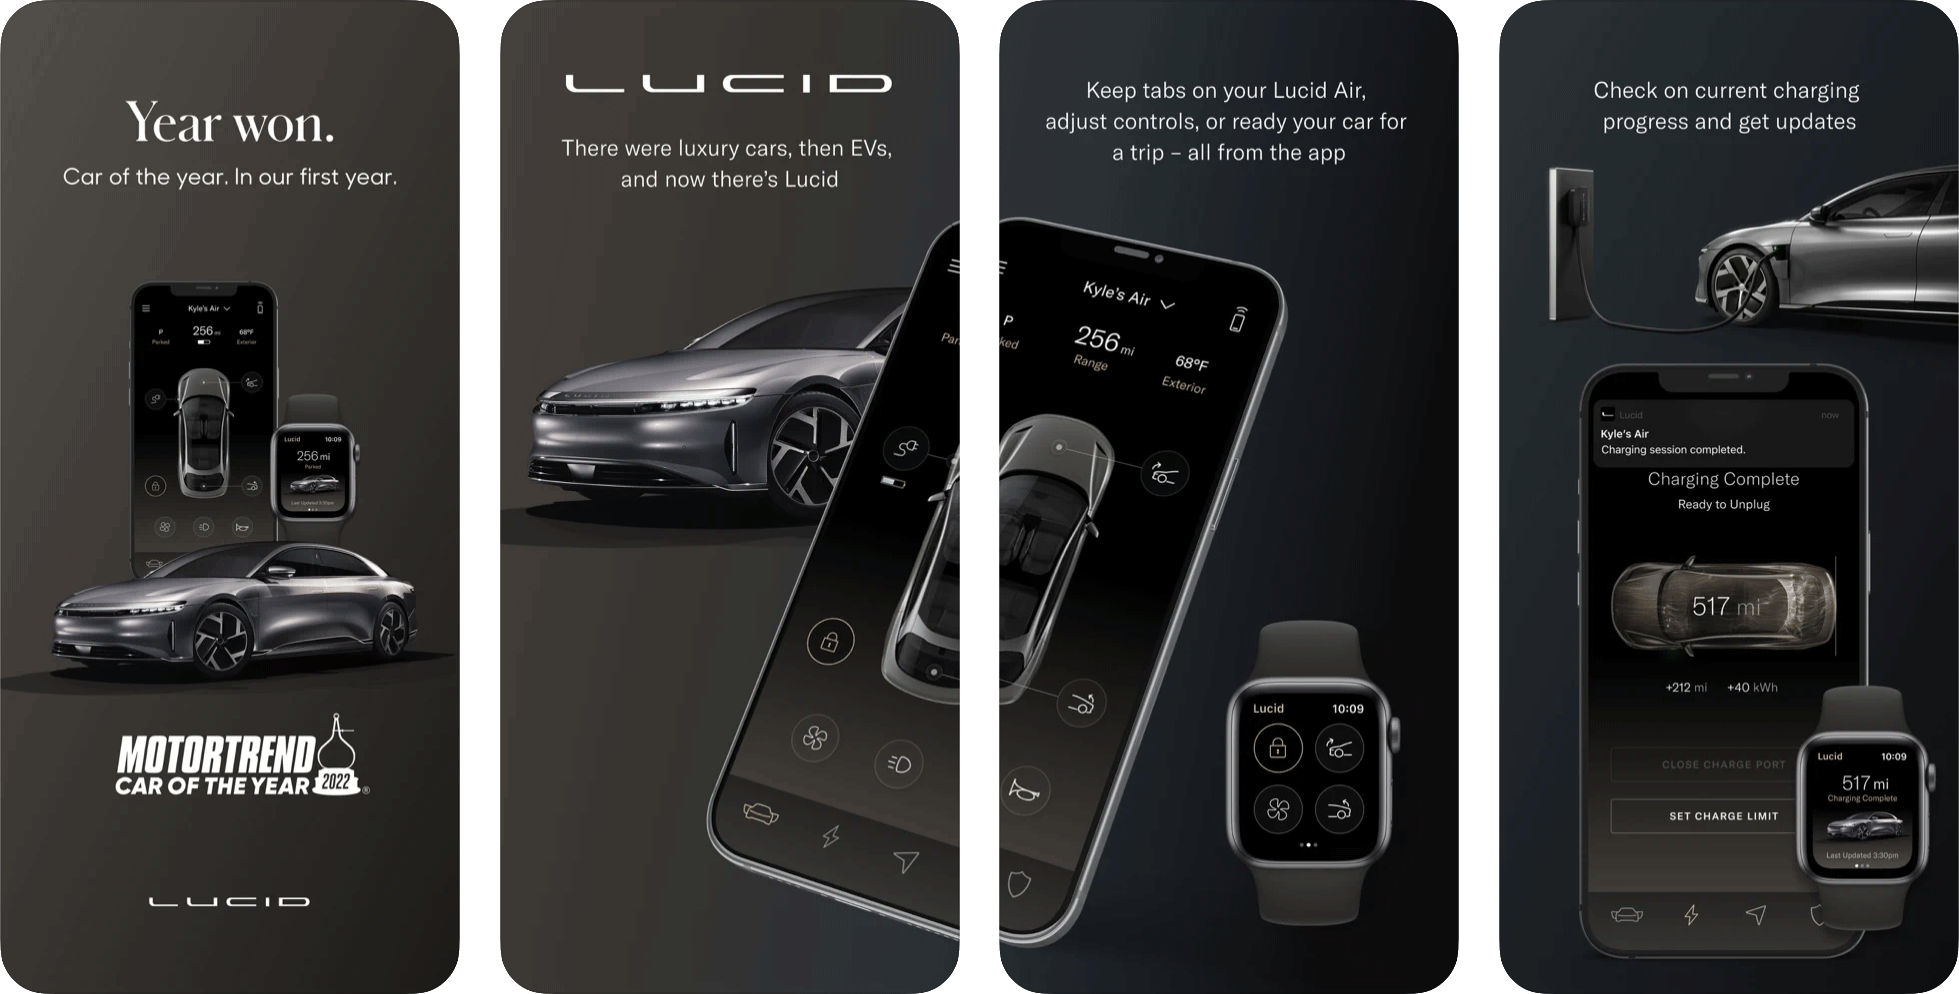 Another Small Update For Lucid Mobile App for iOS and Android